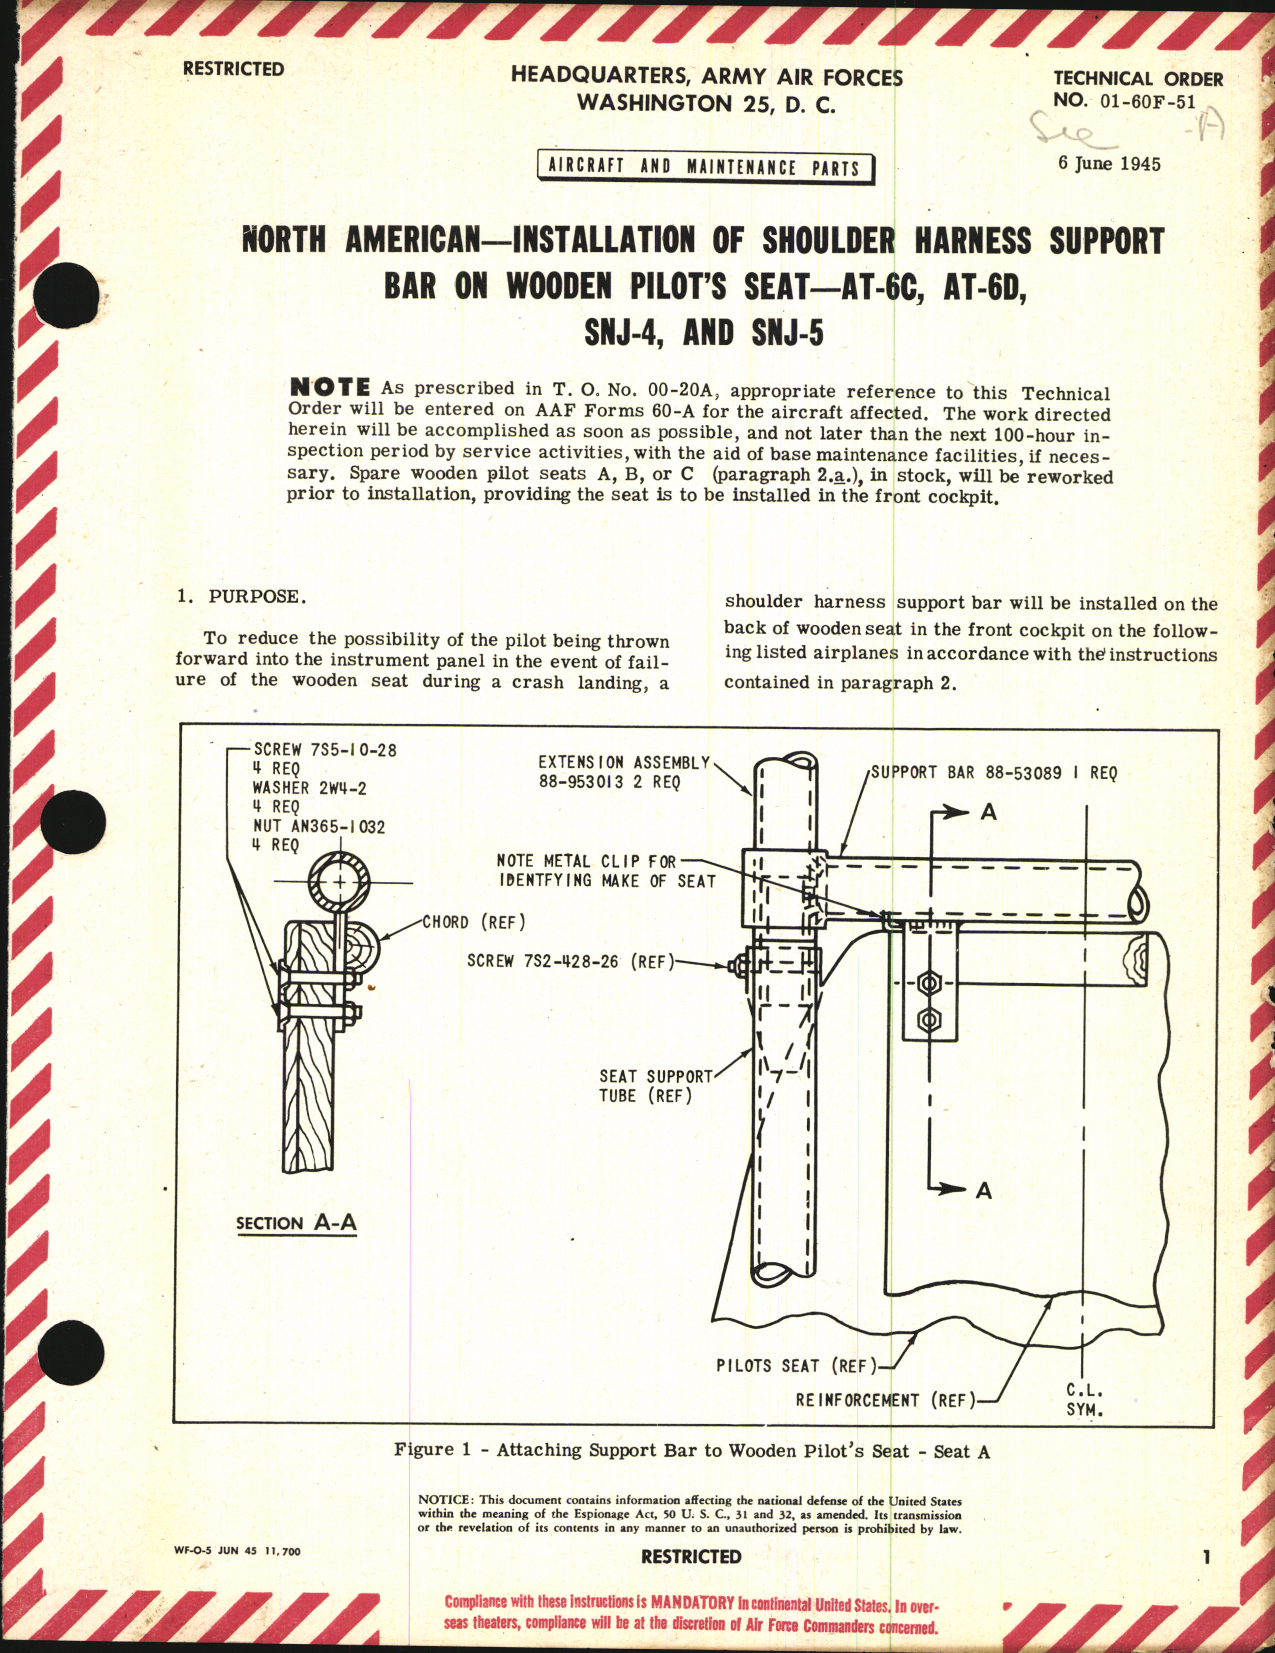 Sample page 1 from AirCorps Library document: Installation of Shoulder Harness Support Bar on Wooden Pilot's Seat for AT-6C, D, SNJ-4 and -5